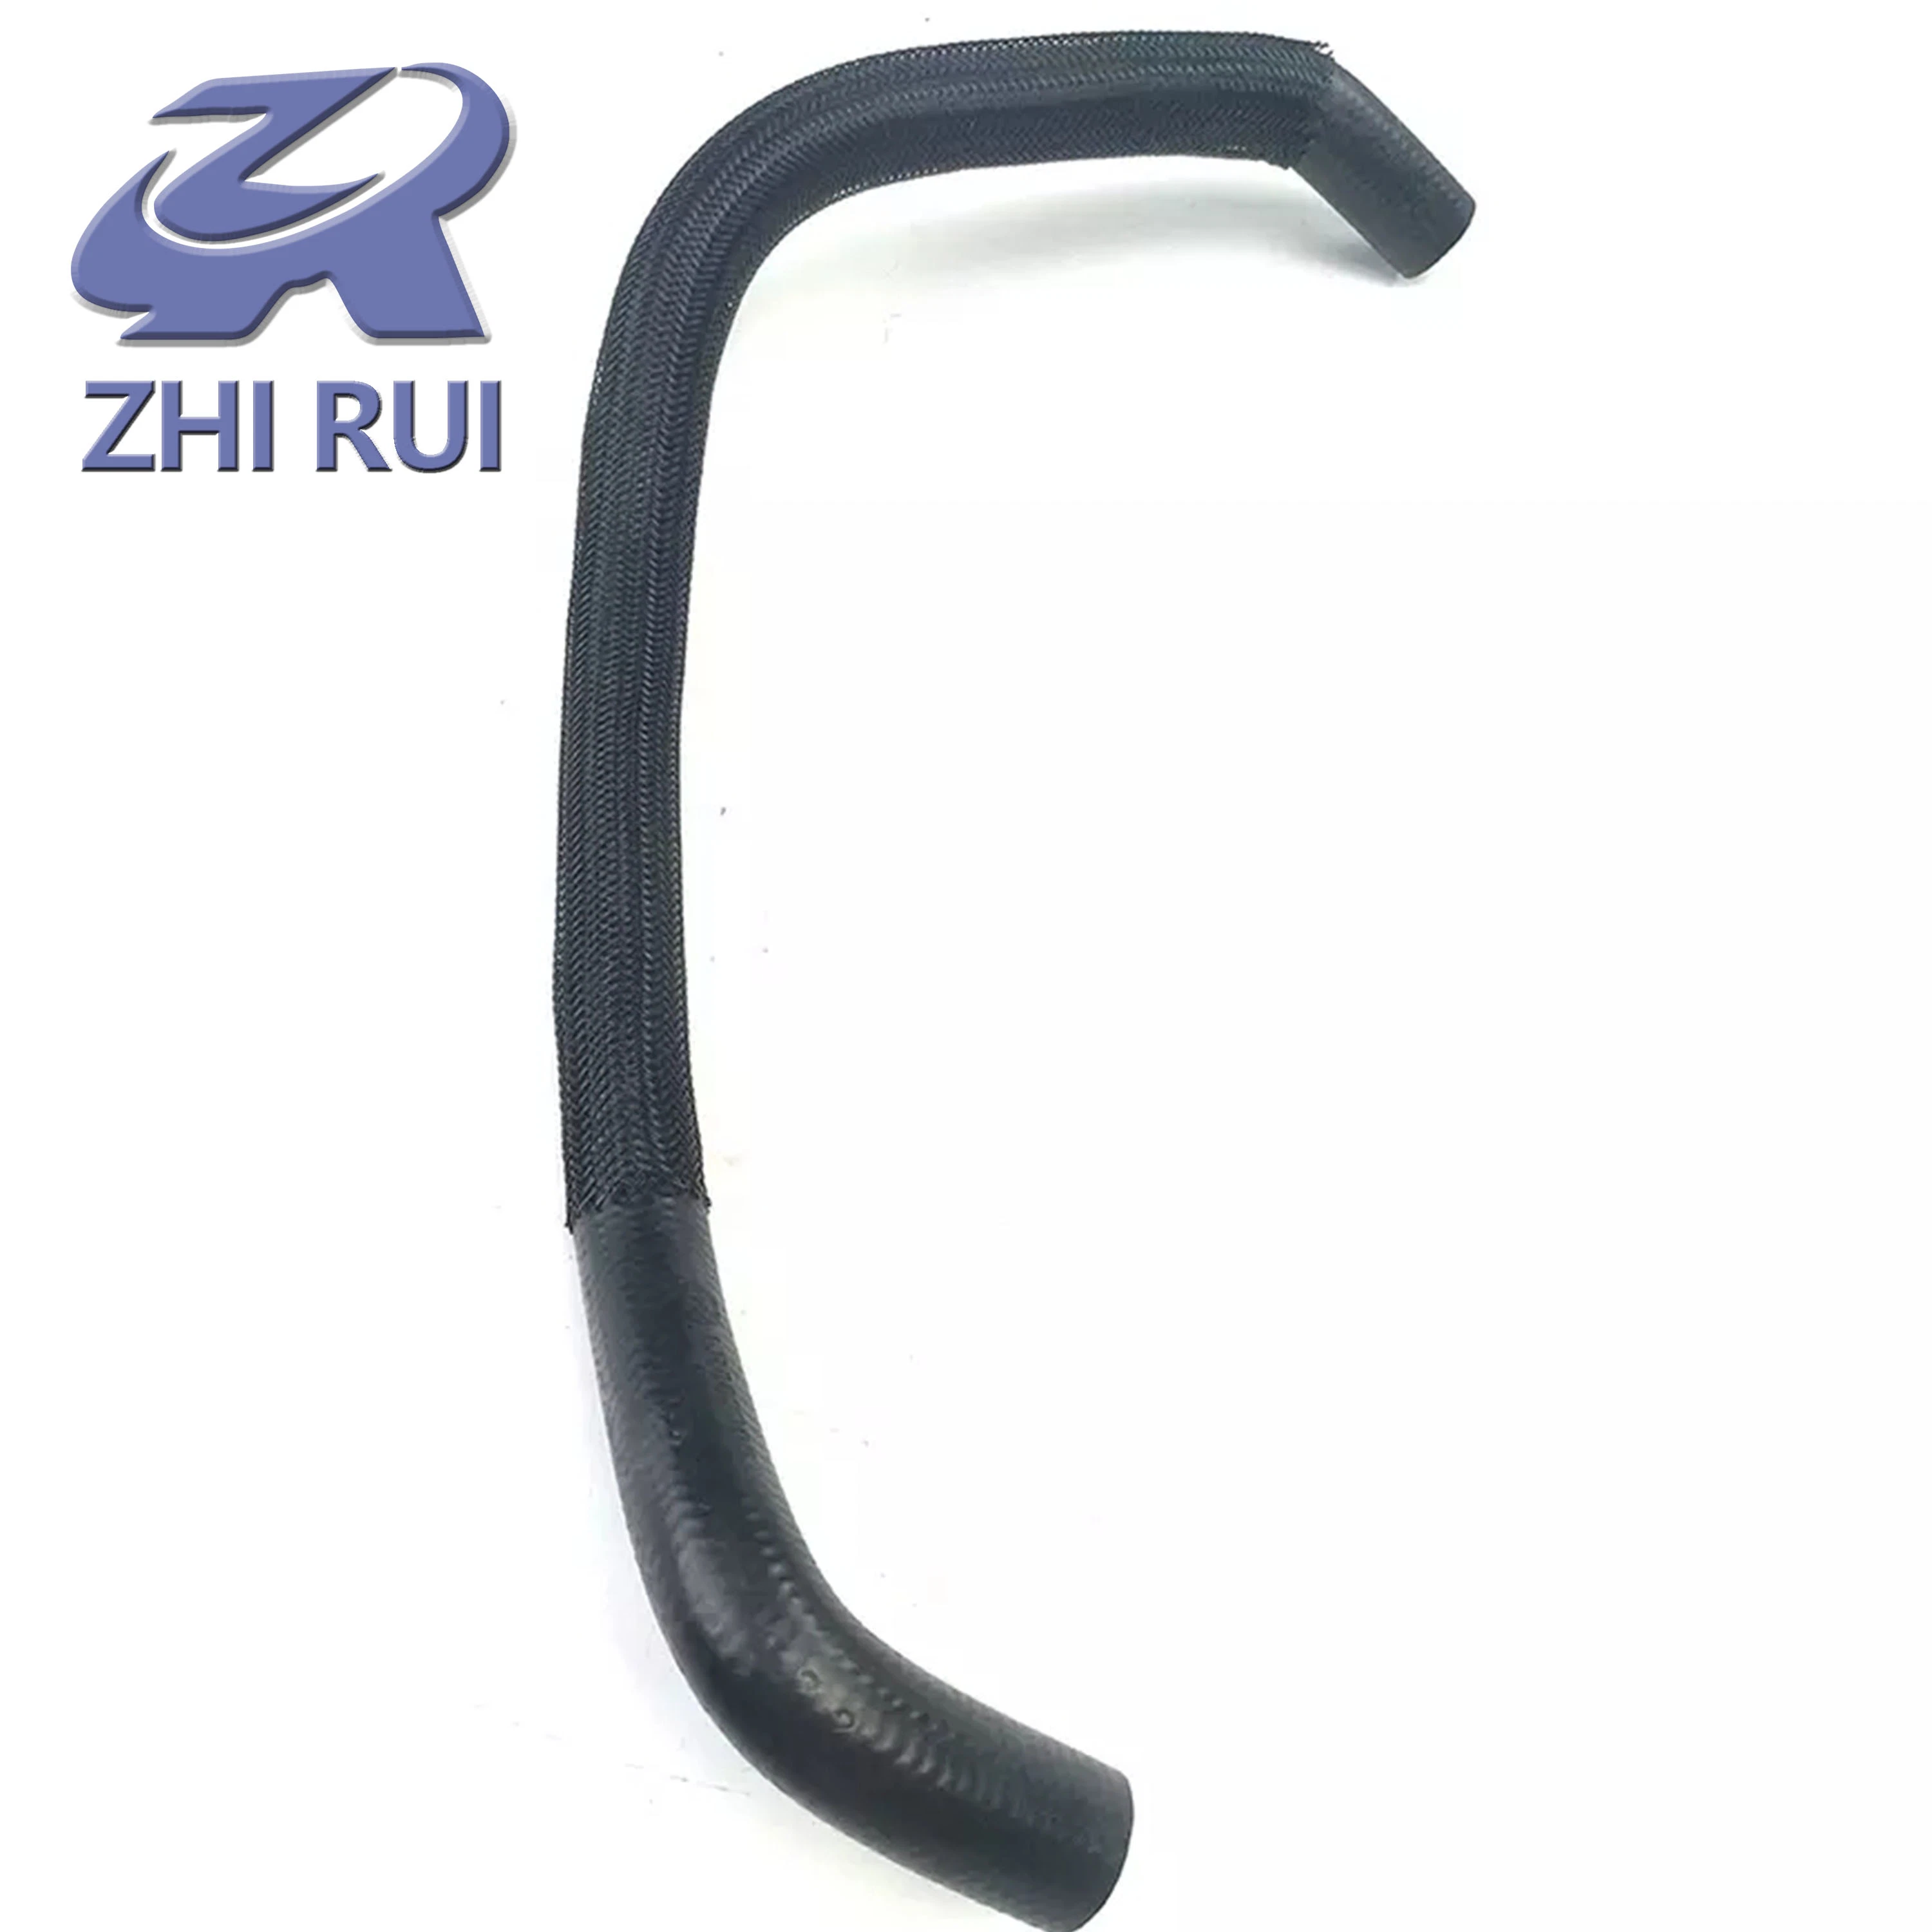 Auto Engine Radiator Coolant Hose Structure Cooling System Water Pipe for Auto Parts 2.0t Hse Luxury 2.0t Se OEM Lr062305